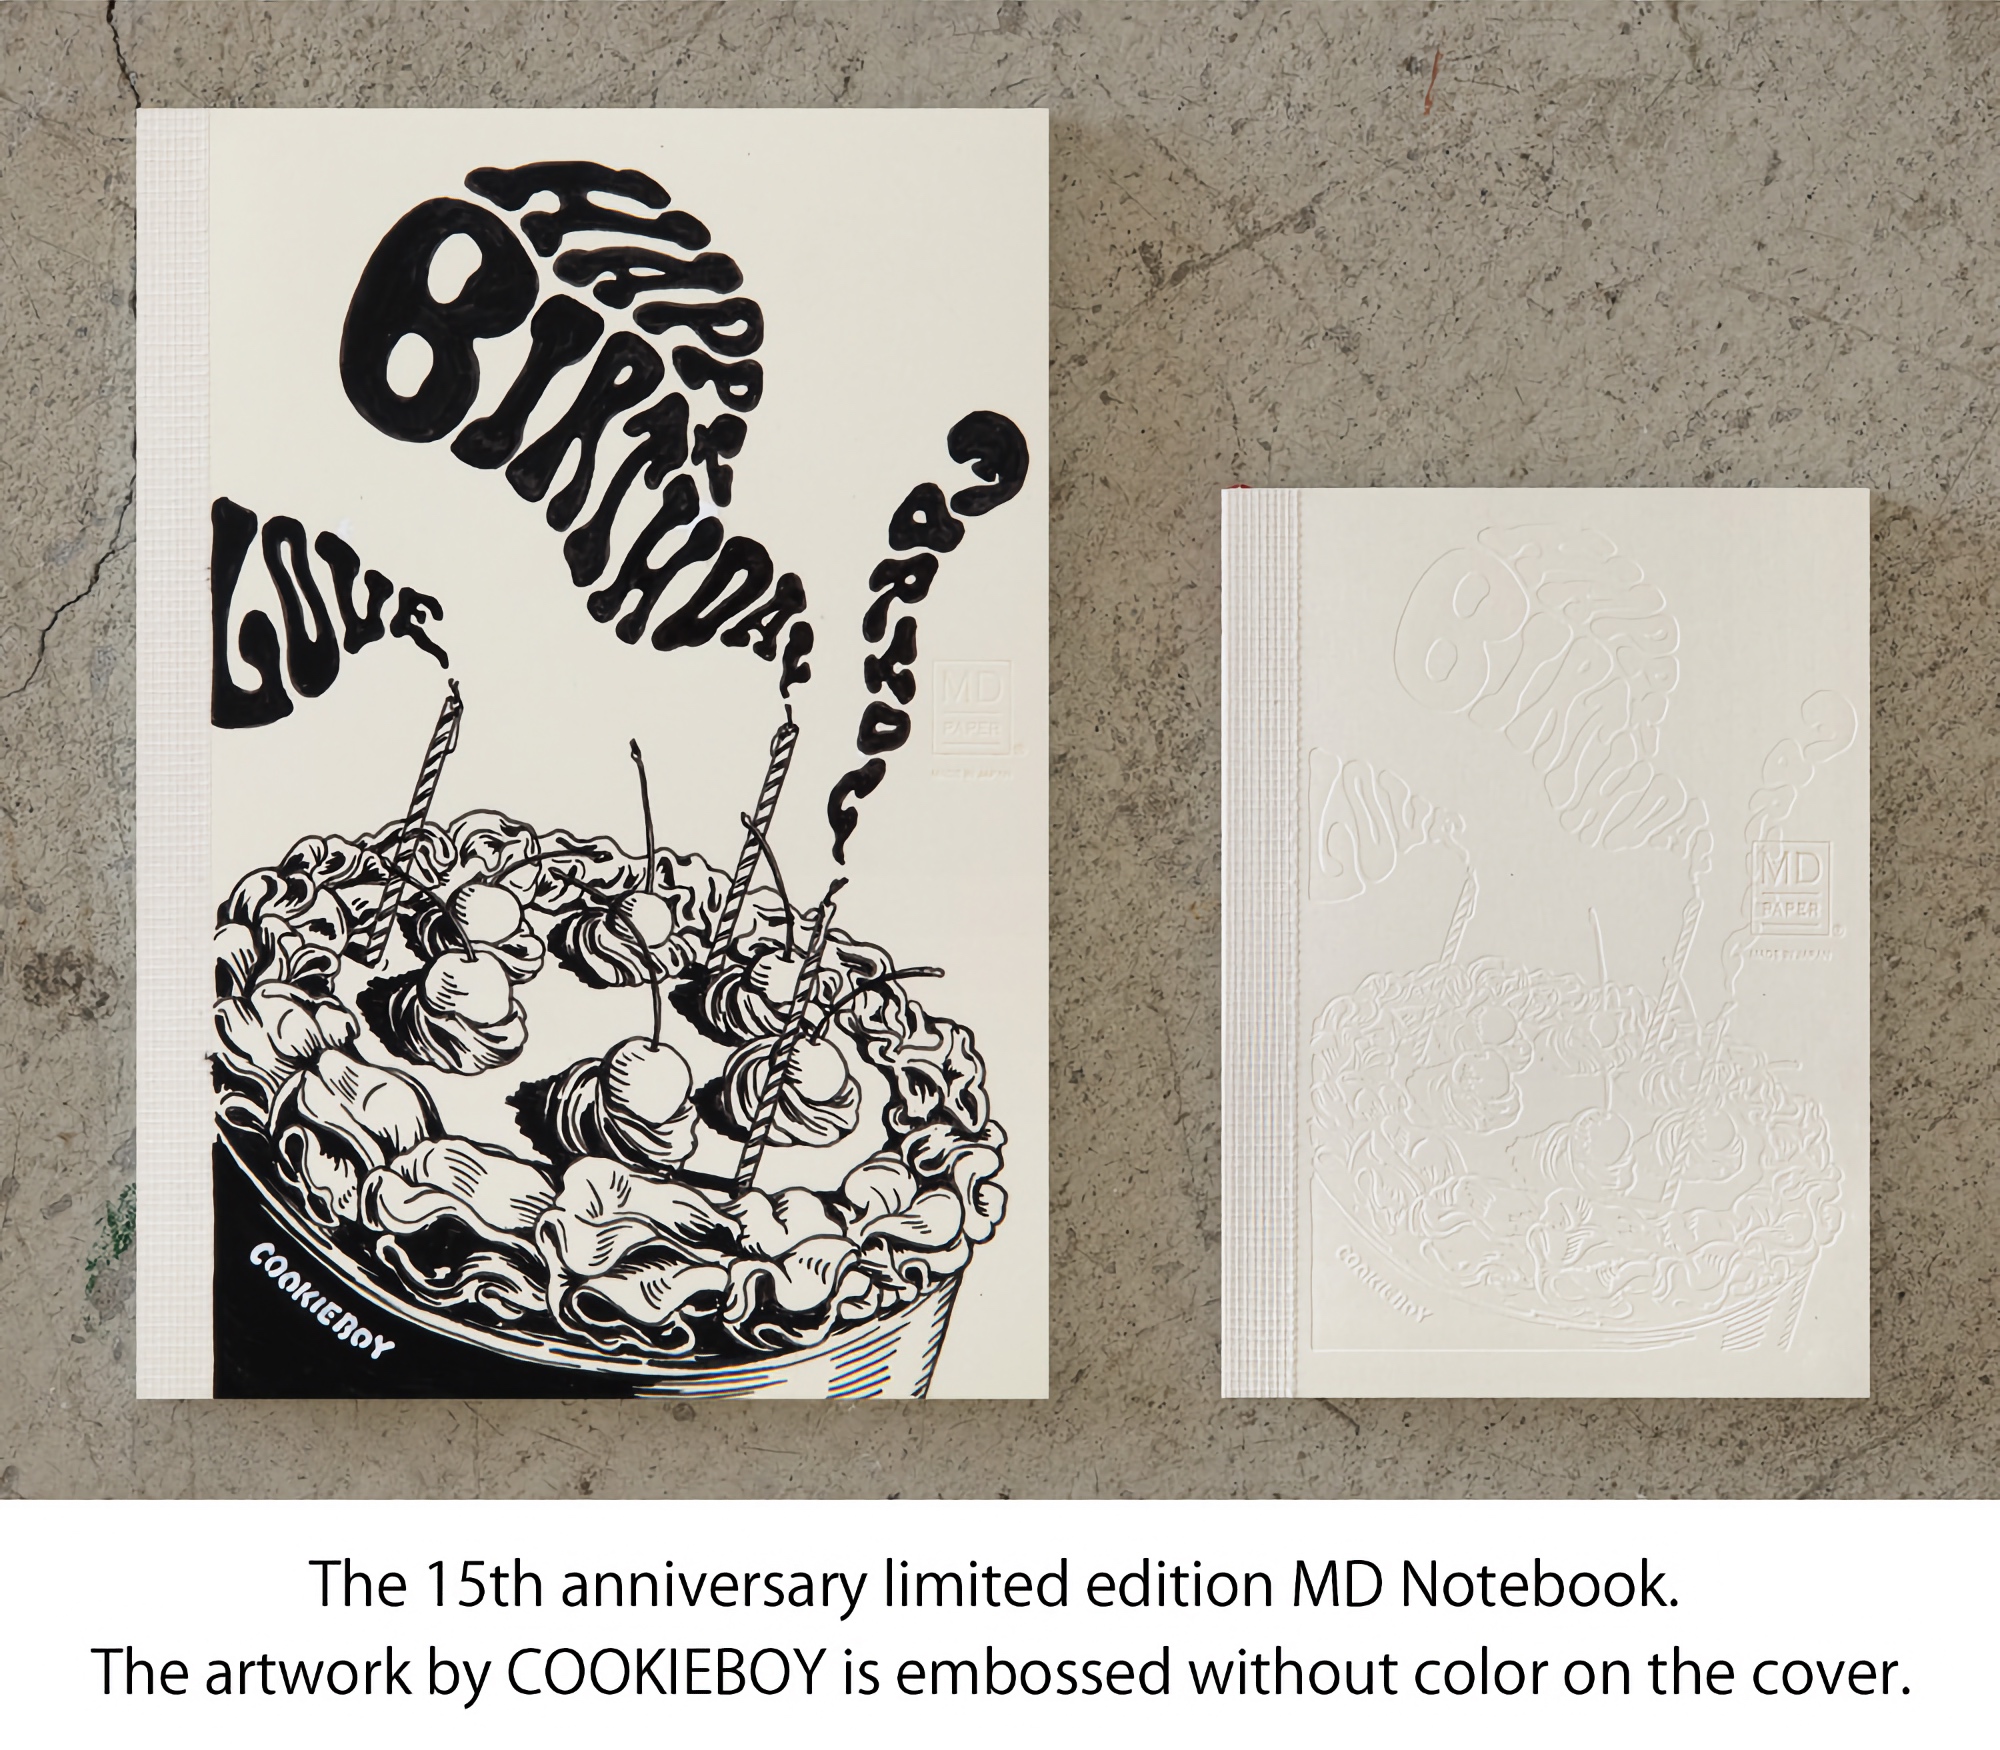 Midori MD Notebook [A6] Blank Artist Collaboration COOKIEBOY 15th Anniversary [Limited Edition]